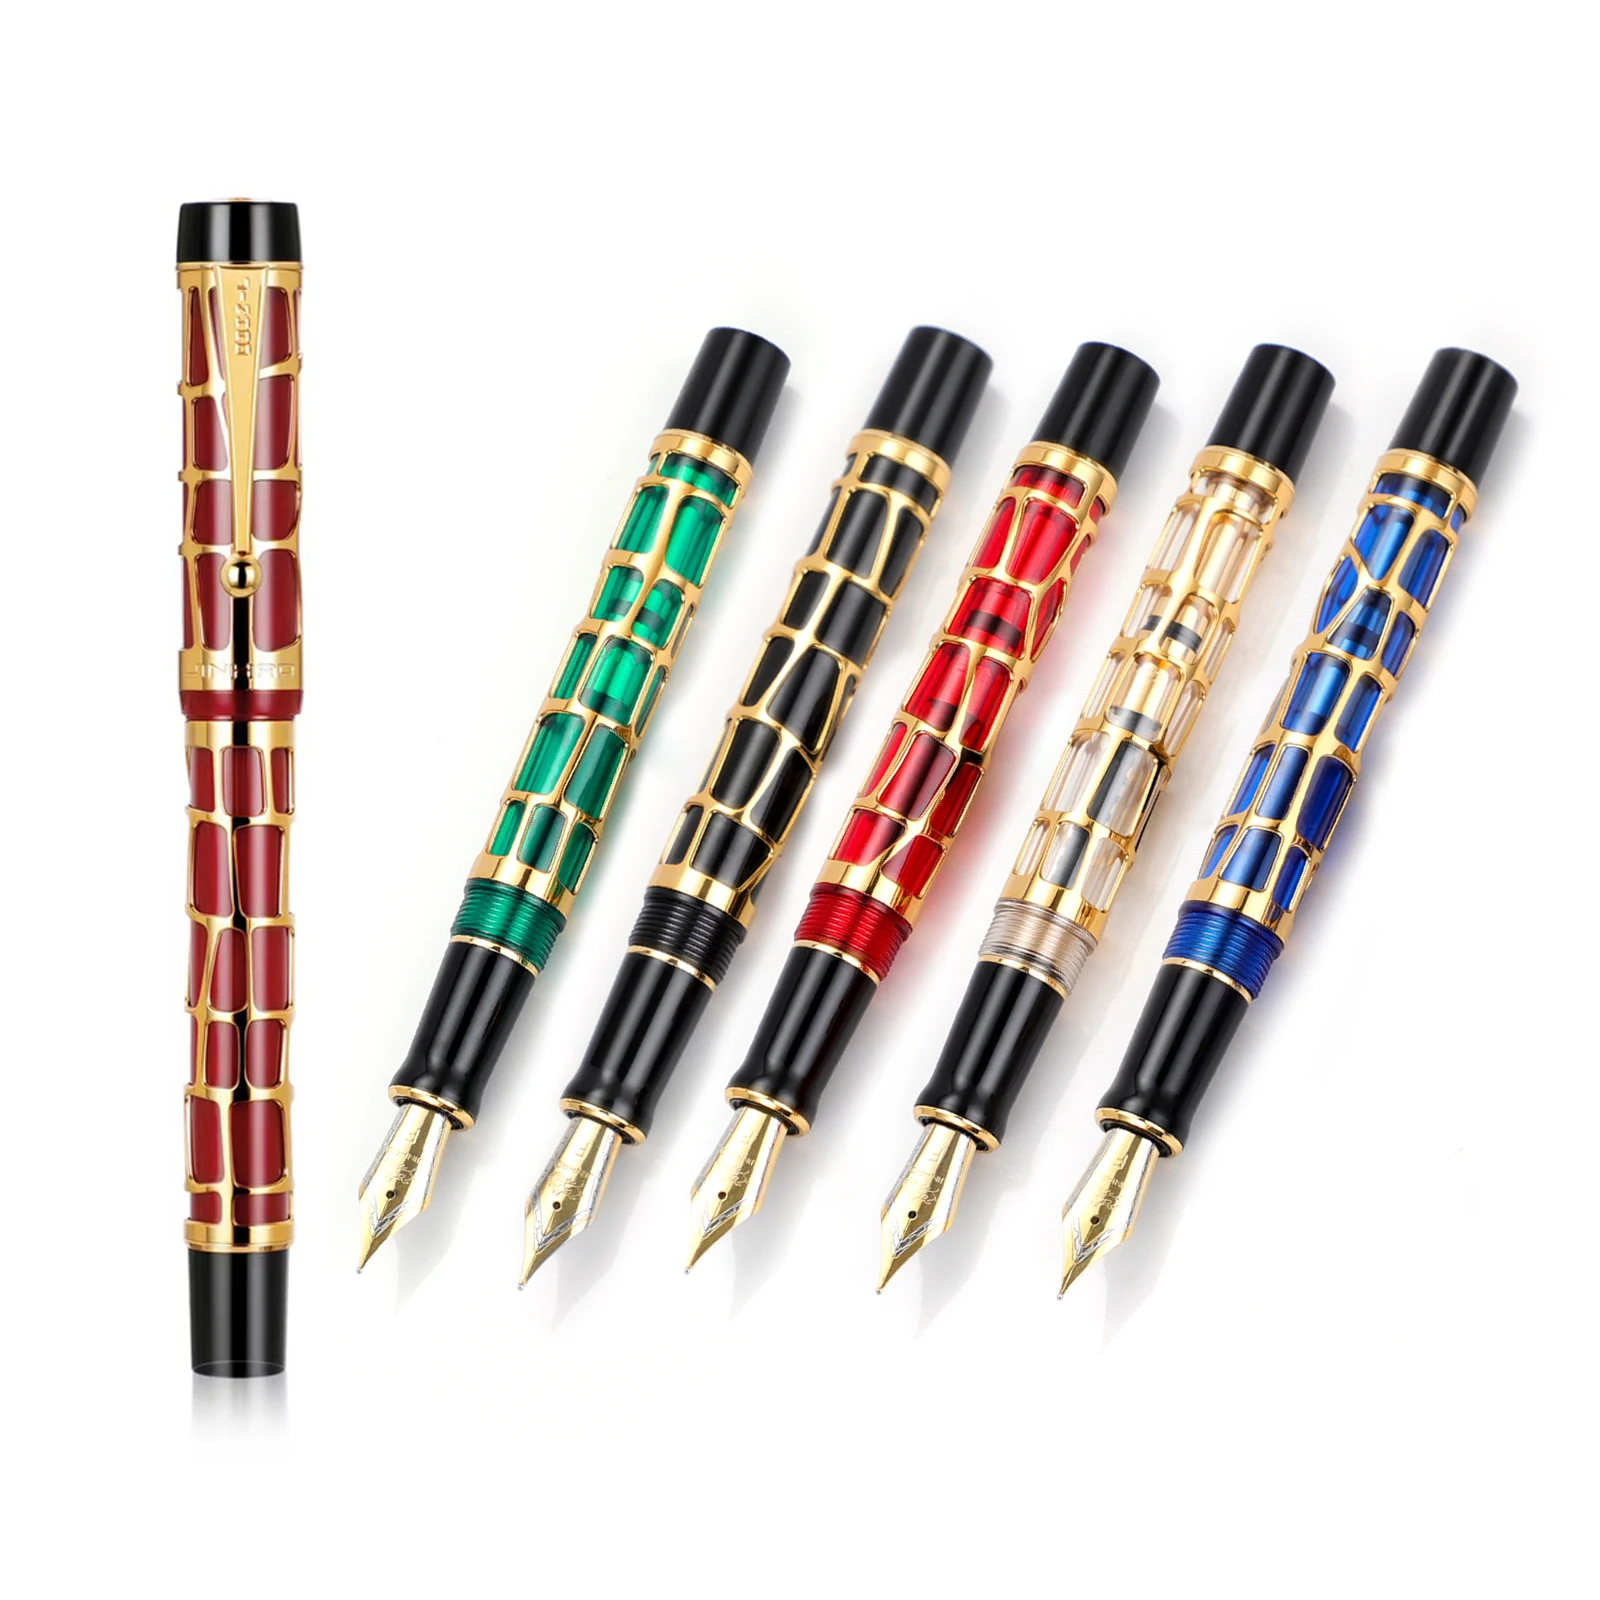 Jinhao Century 100 Fountain Pen Electroplating Gold Hollow Writing Ink Pens EF 0.4mm Nib for Business Office supplies gift pens